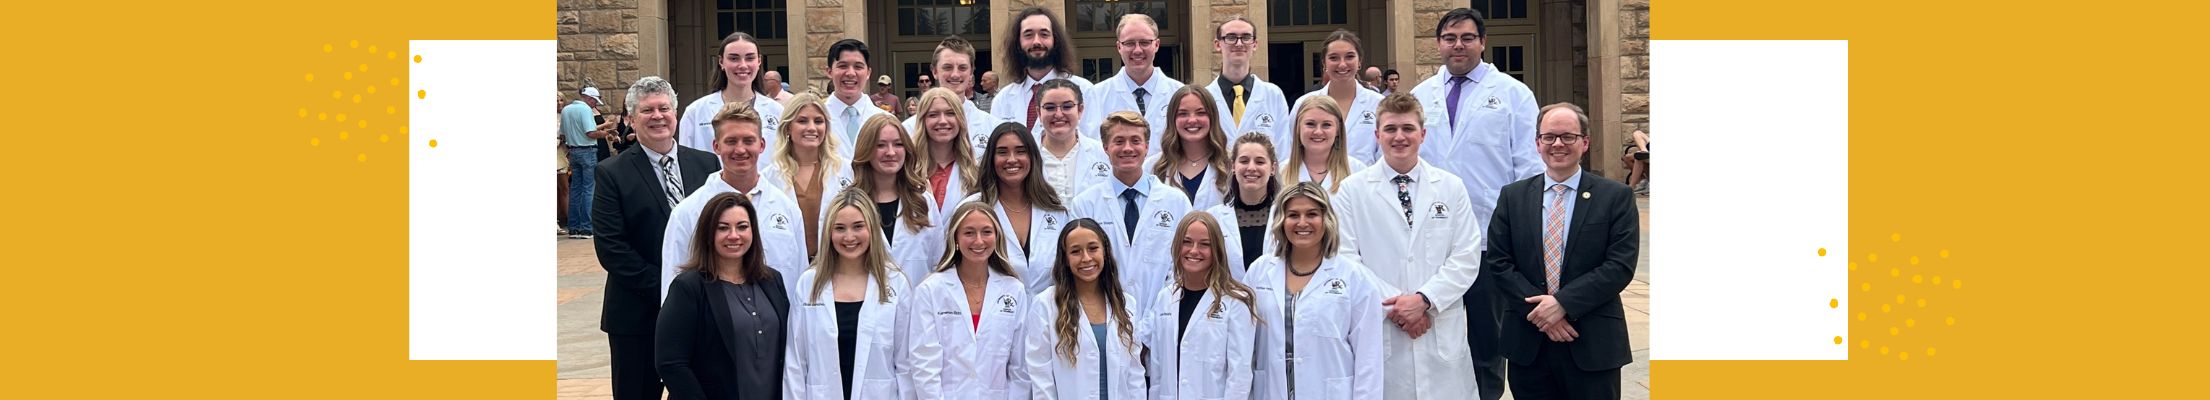 students in their white coats 